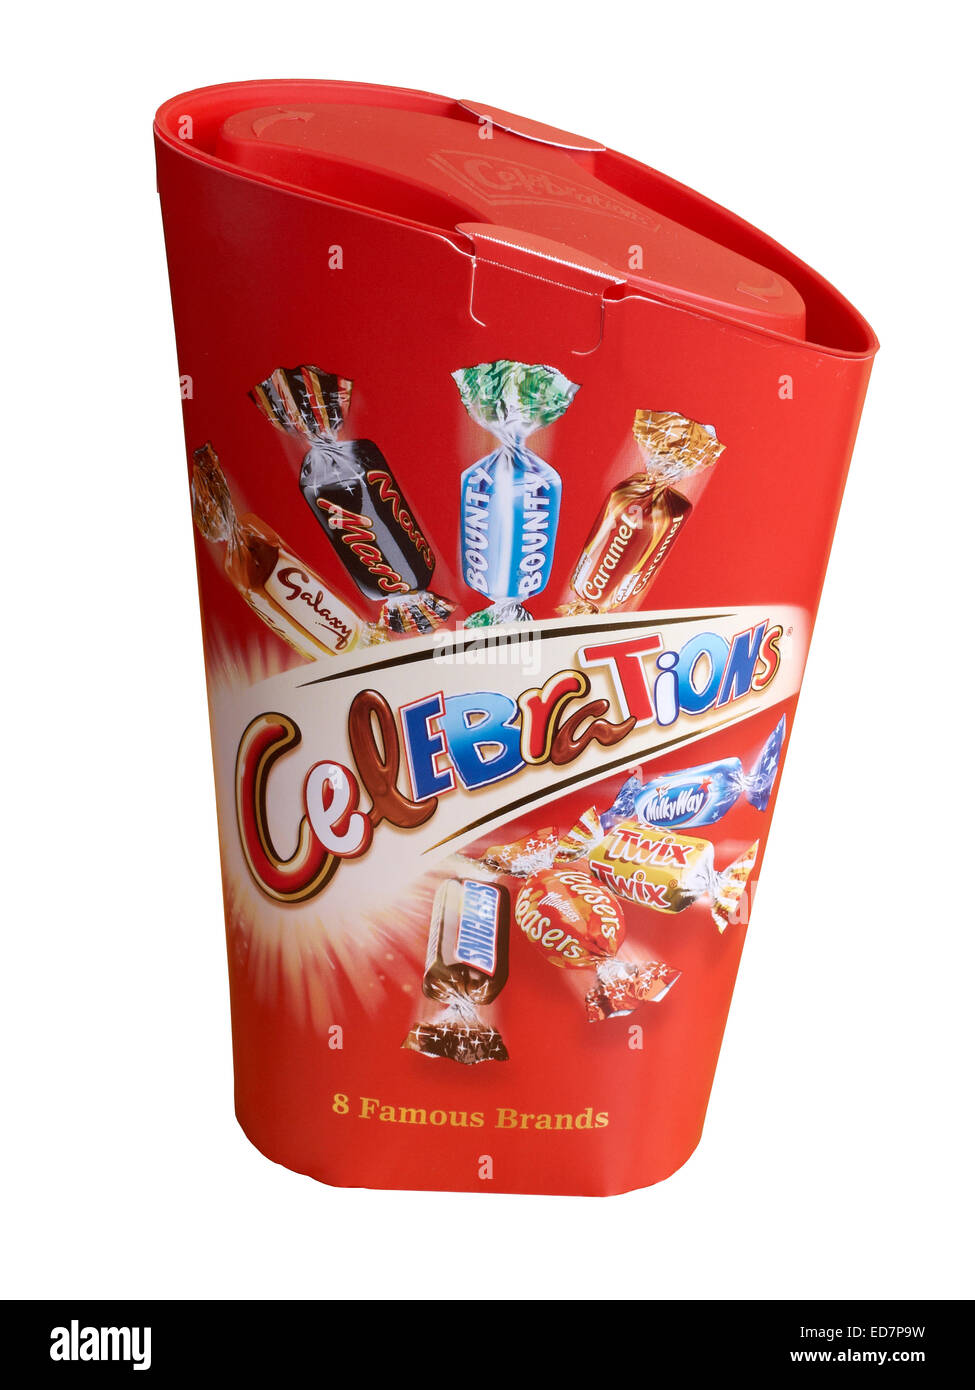 Celebrations chocolate Cut Out Stock Images & Pictures